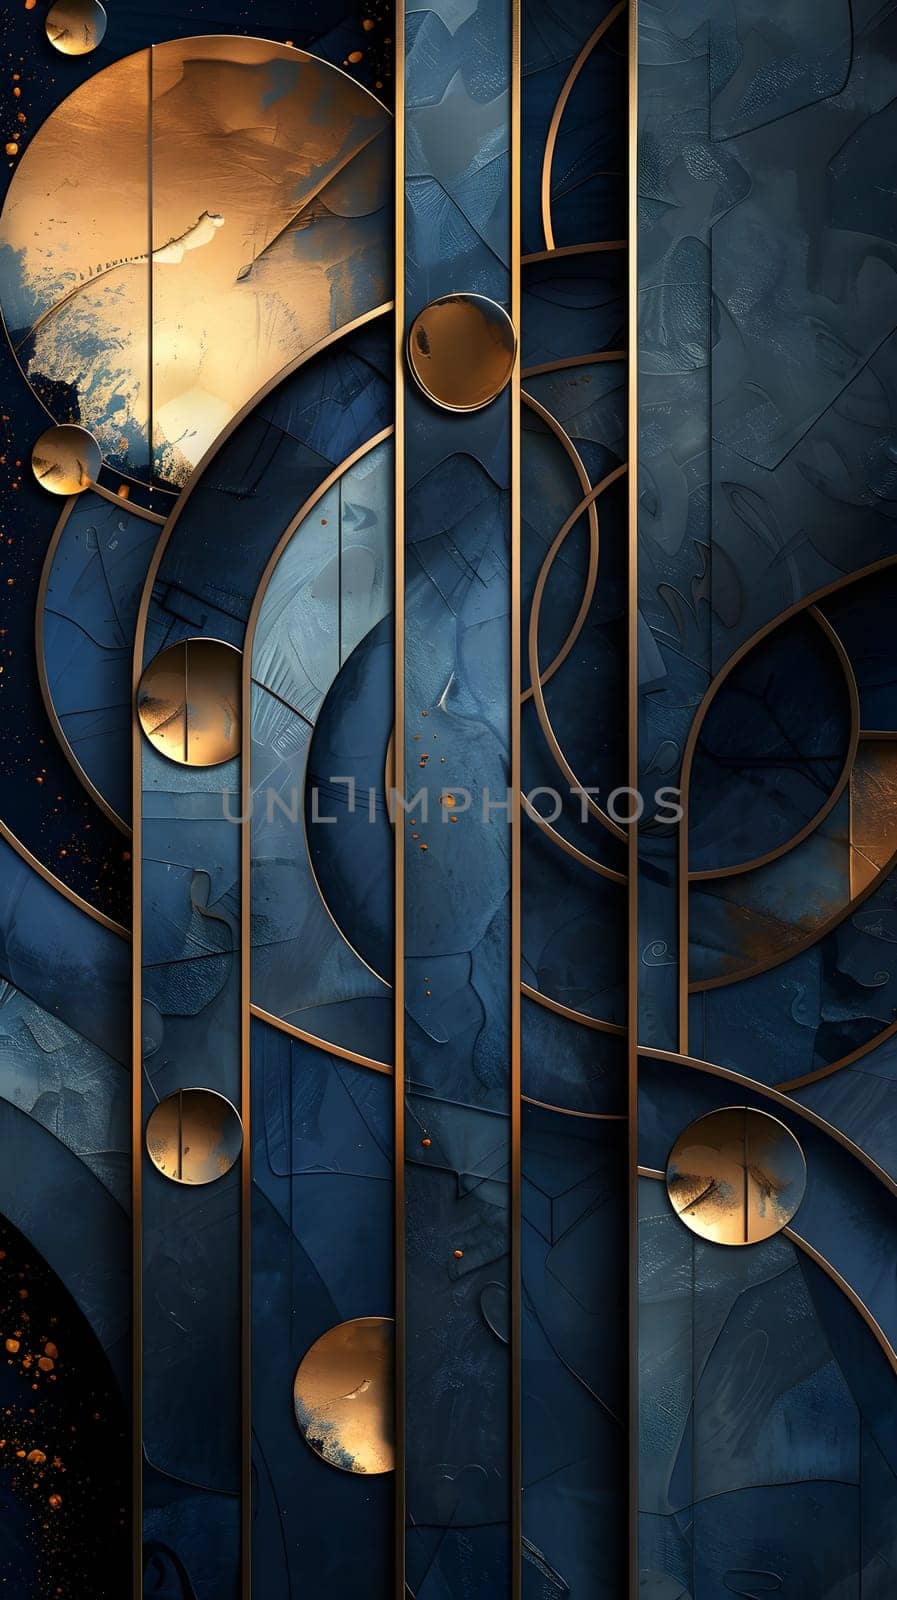 A vibrant abstract painting in electric blue and gold hues featuring circles and lines, reminiscent of a musical instrument or a pattern found in nature